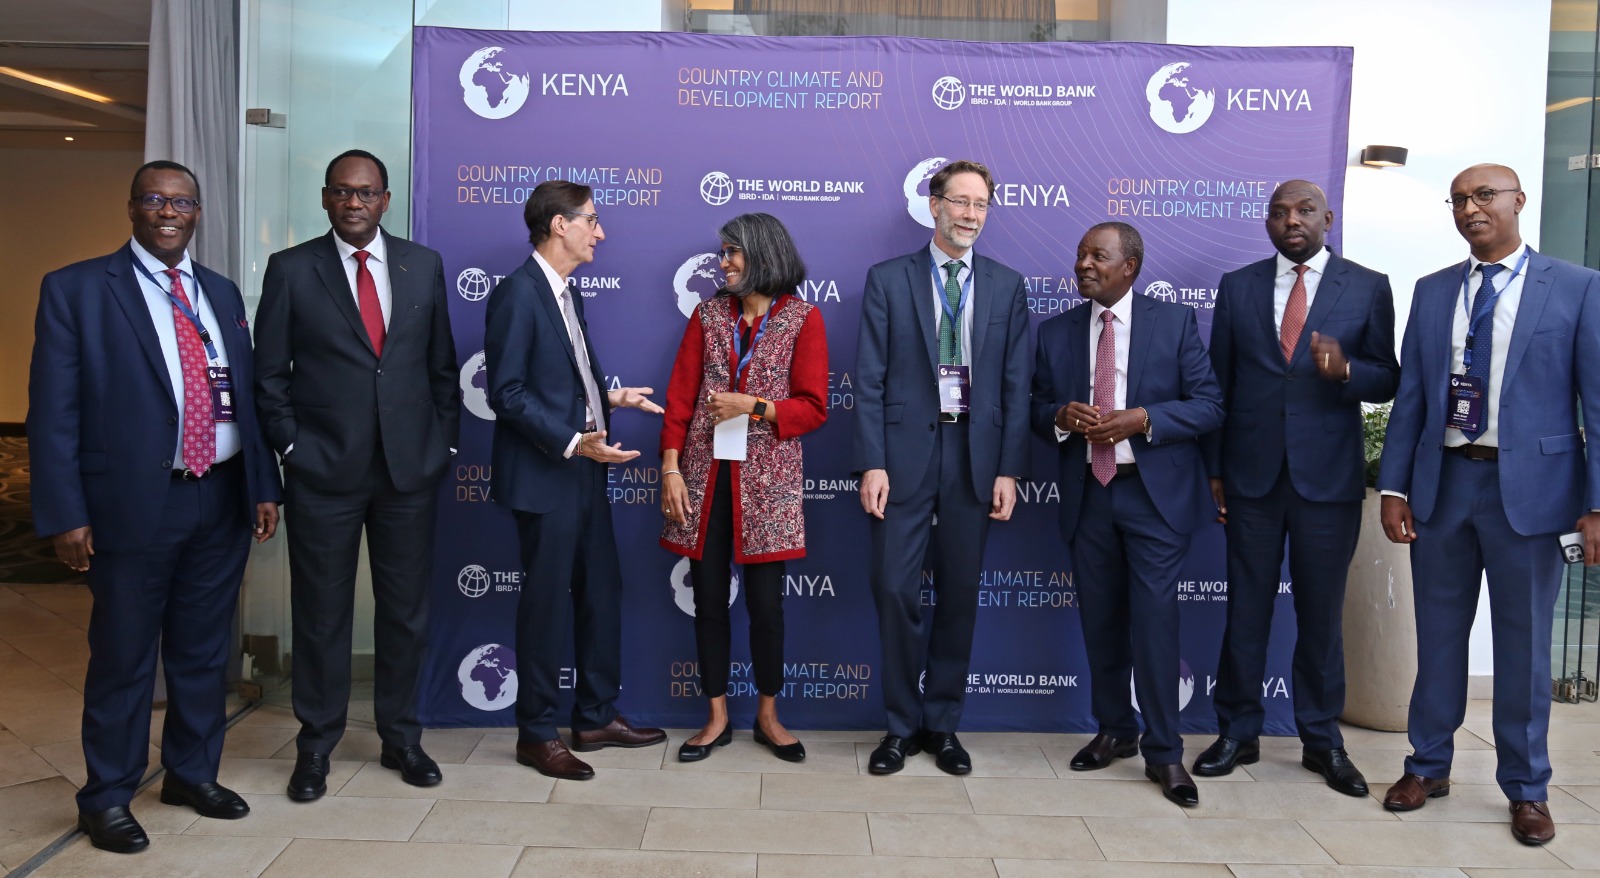 Key officials during the launch of the inaugural Kenya Country Climate and Development report.